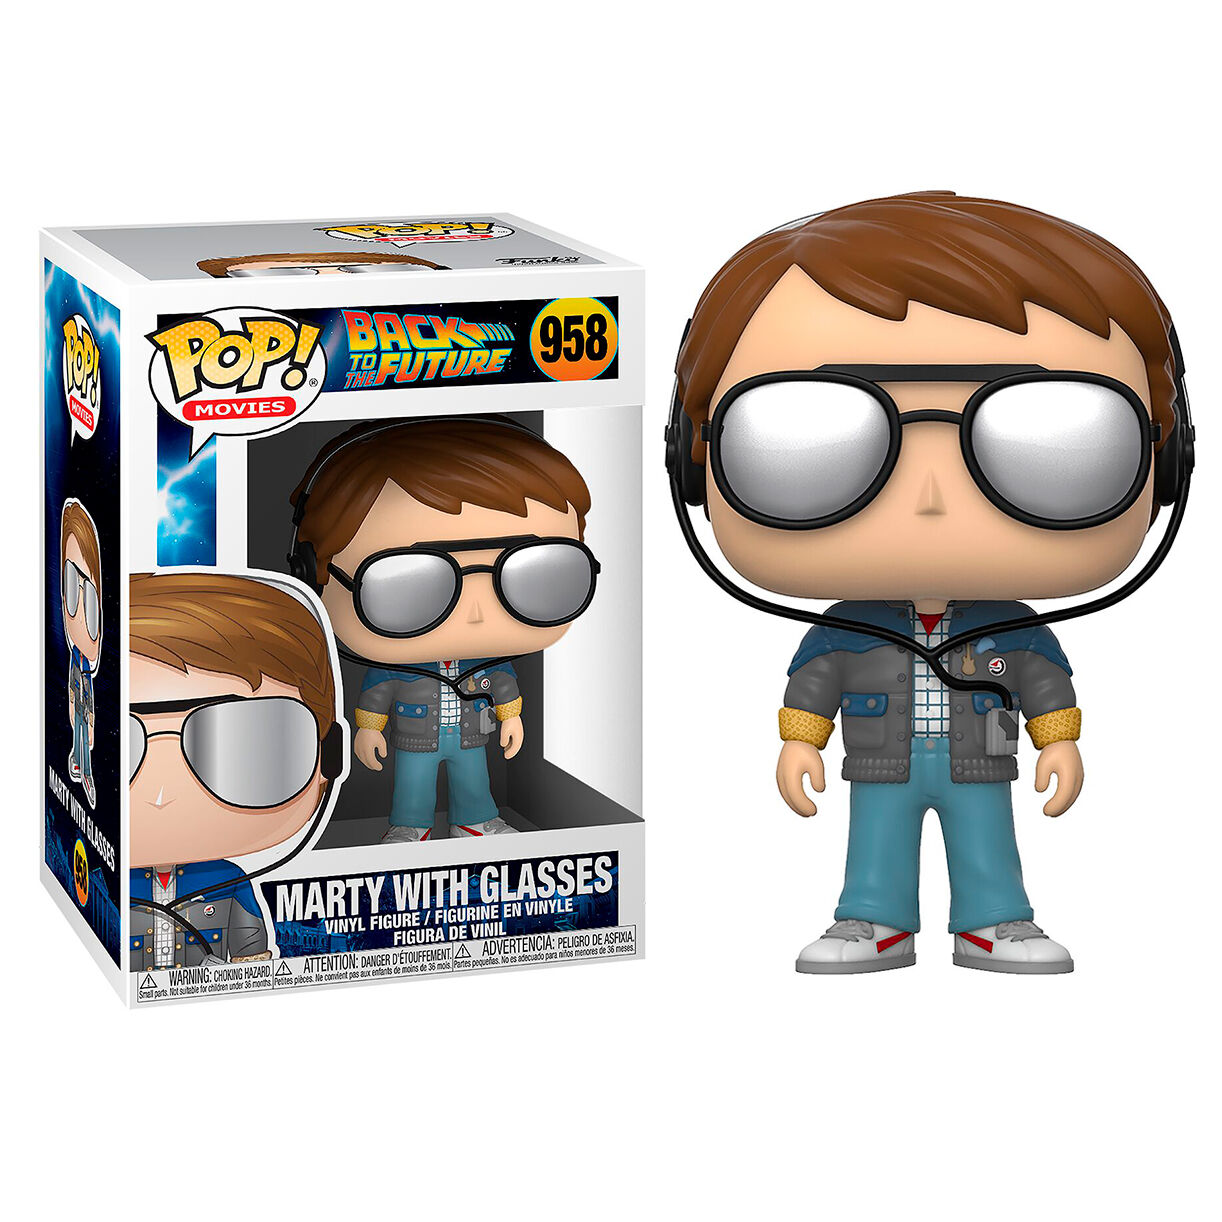 Marty McFly with glasses Funko Pop 958